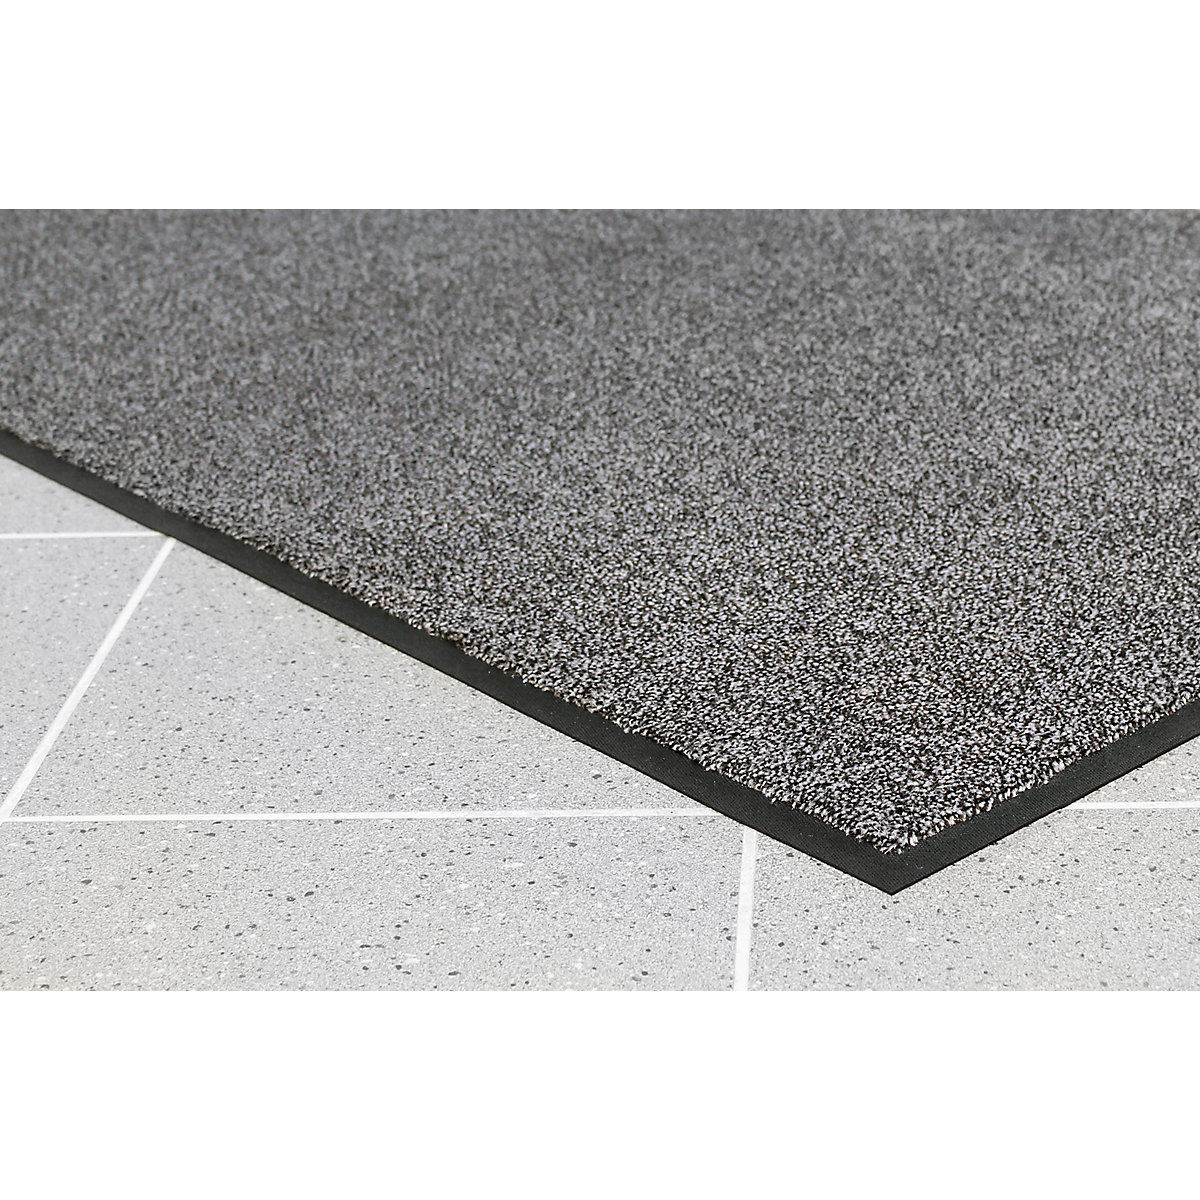 Entrance matting for indoor use, nylon pile, LxW 1500 x 850 mm, charcoal